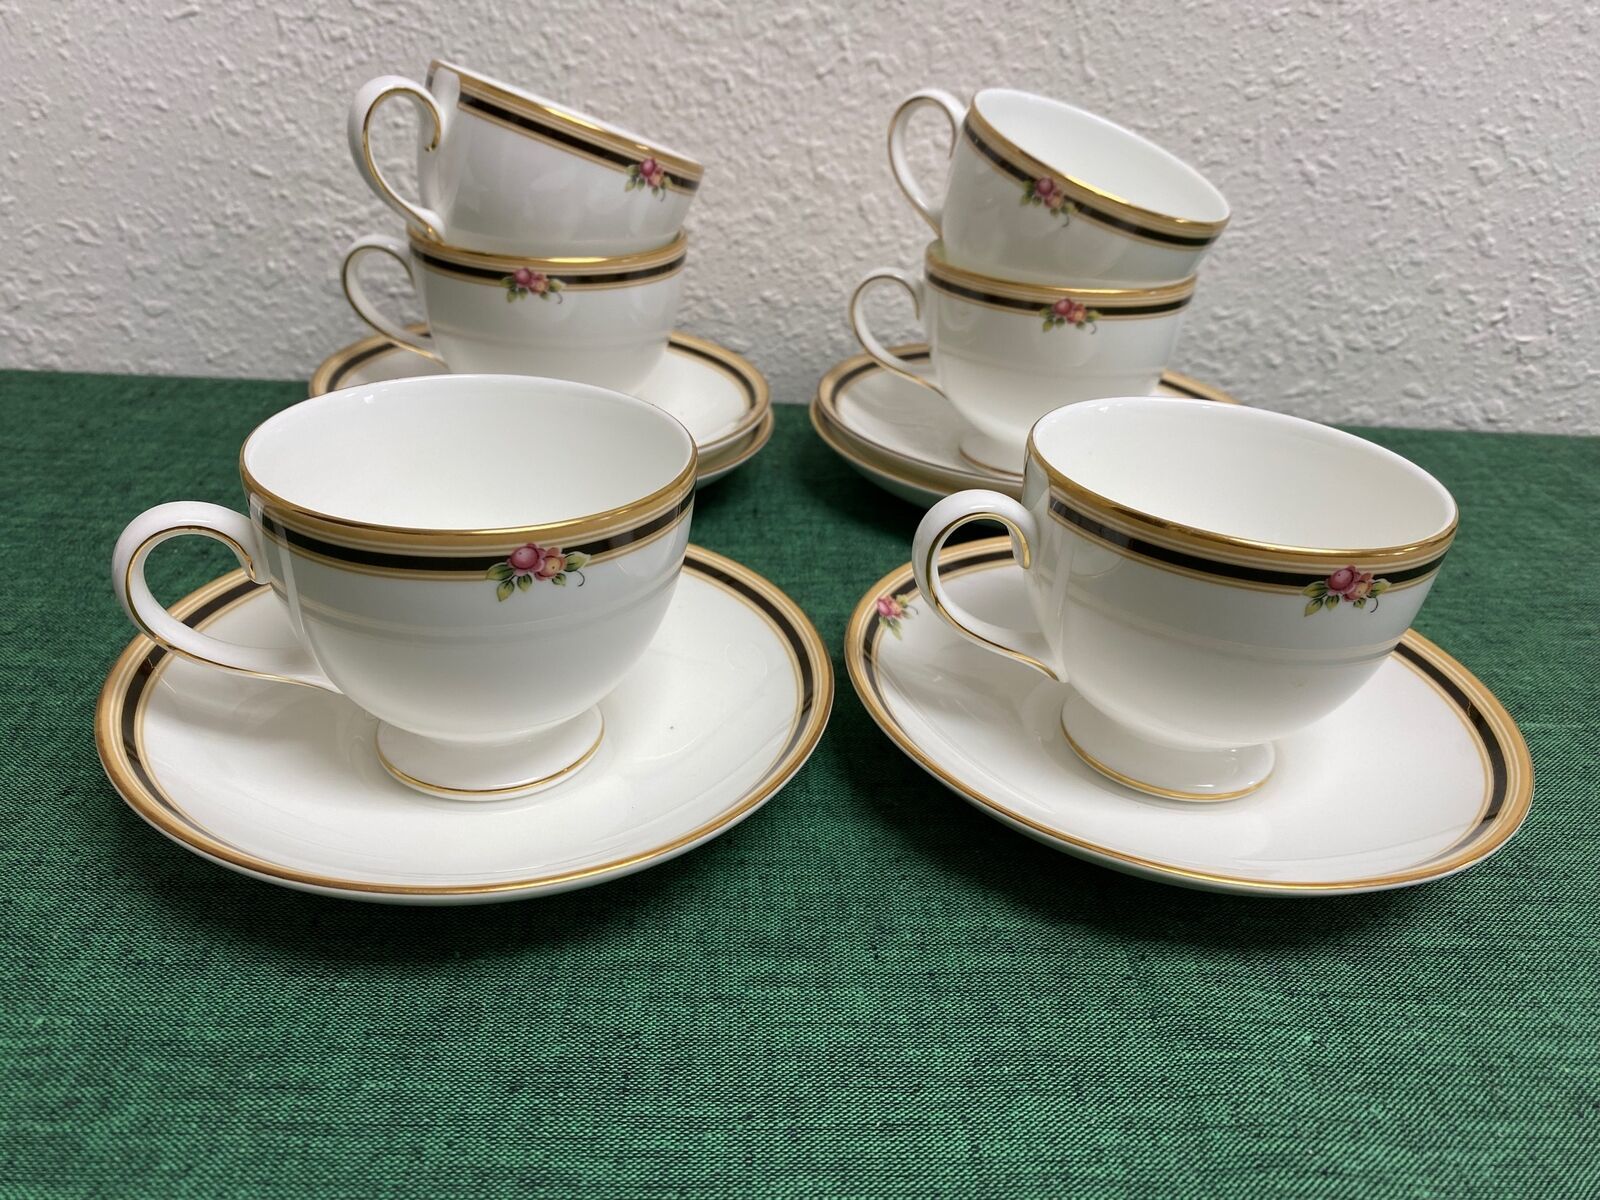 Primary image for Wedgwood Bone China England CLIO Cup & Saucer Sets Lot of 6